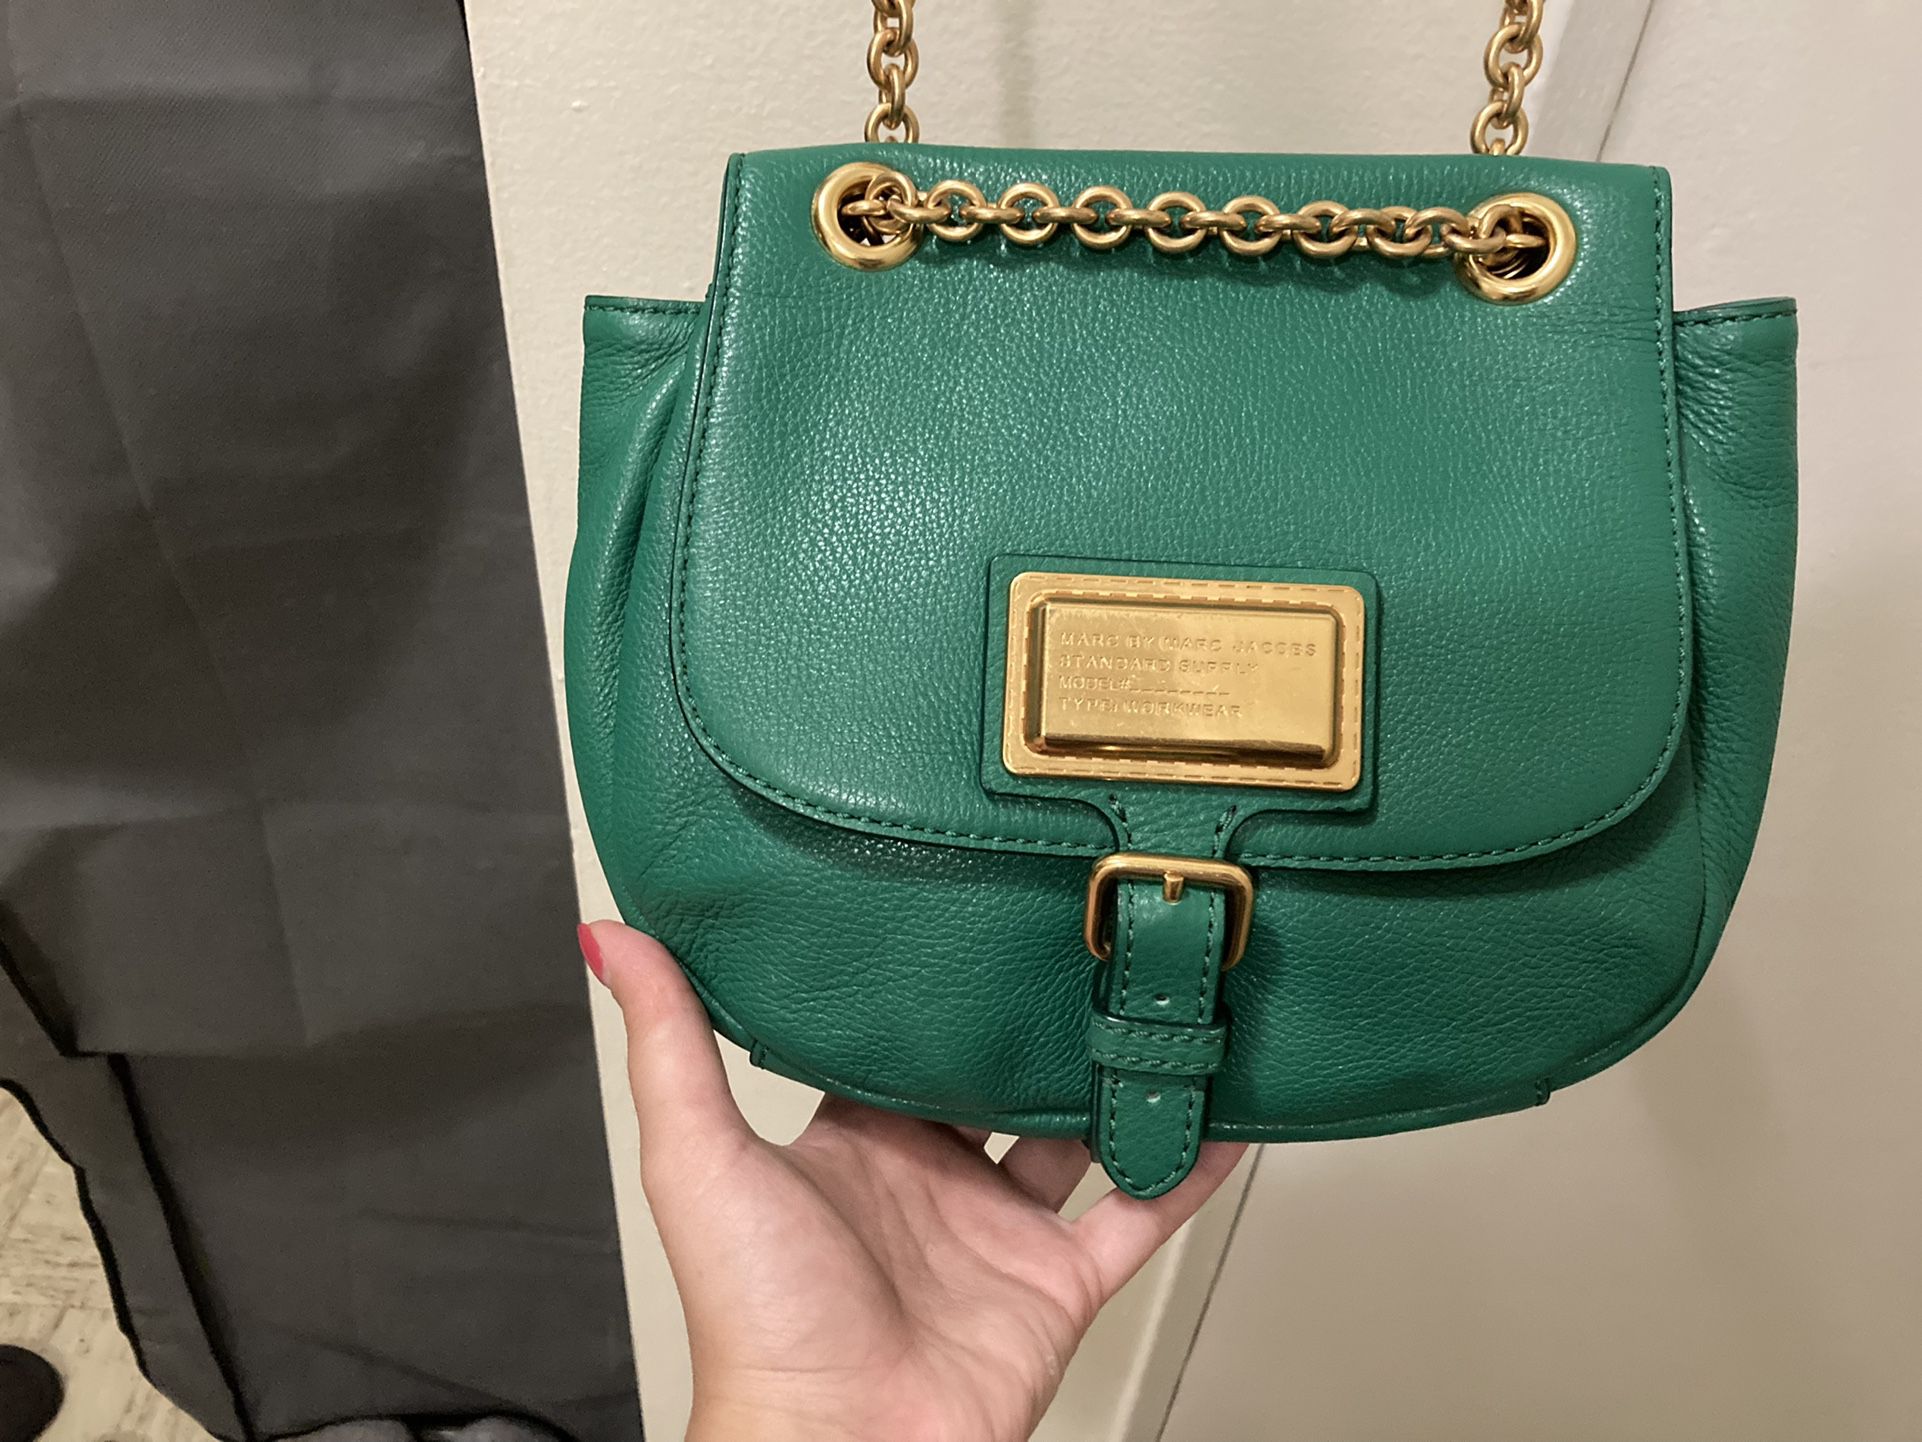 Marc By Marc Jacobs Leather Bag New , Willing To Exchange For Another NWT Marc Jacobs Bag